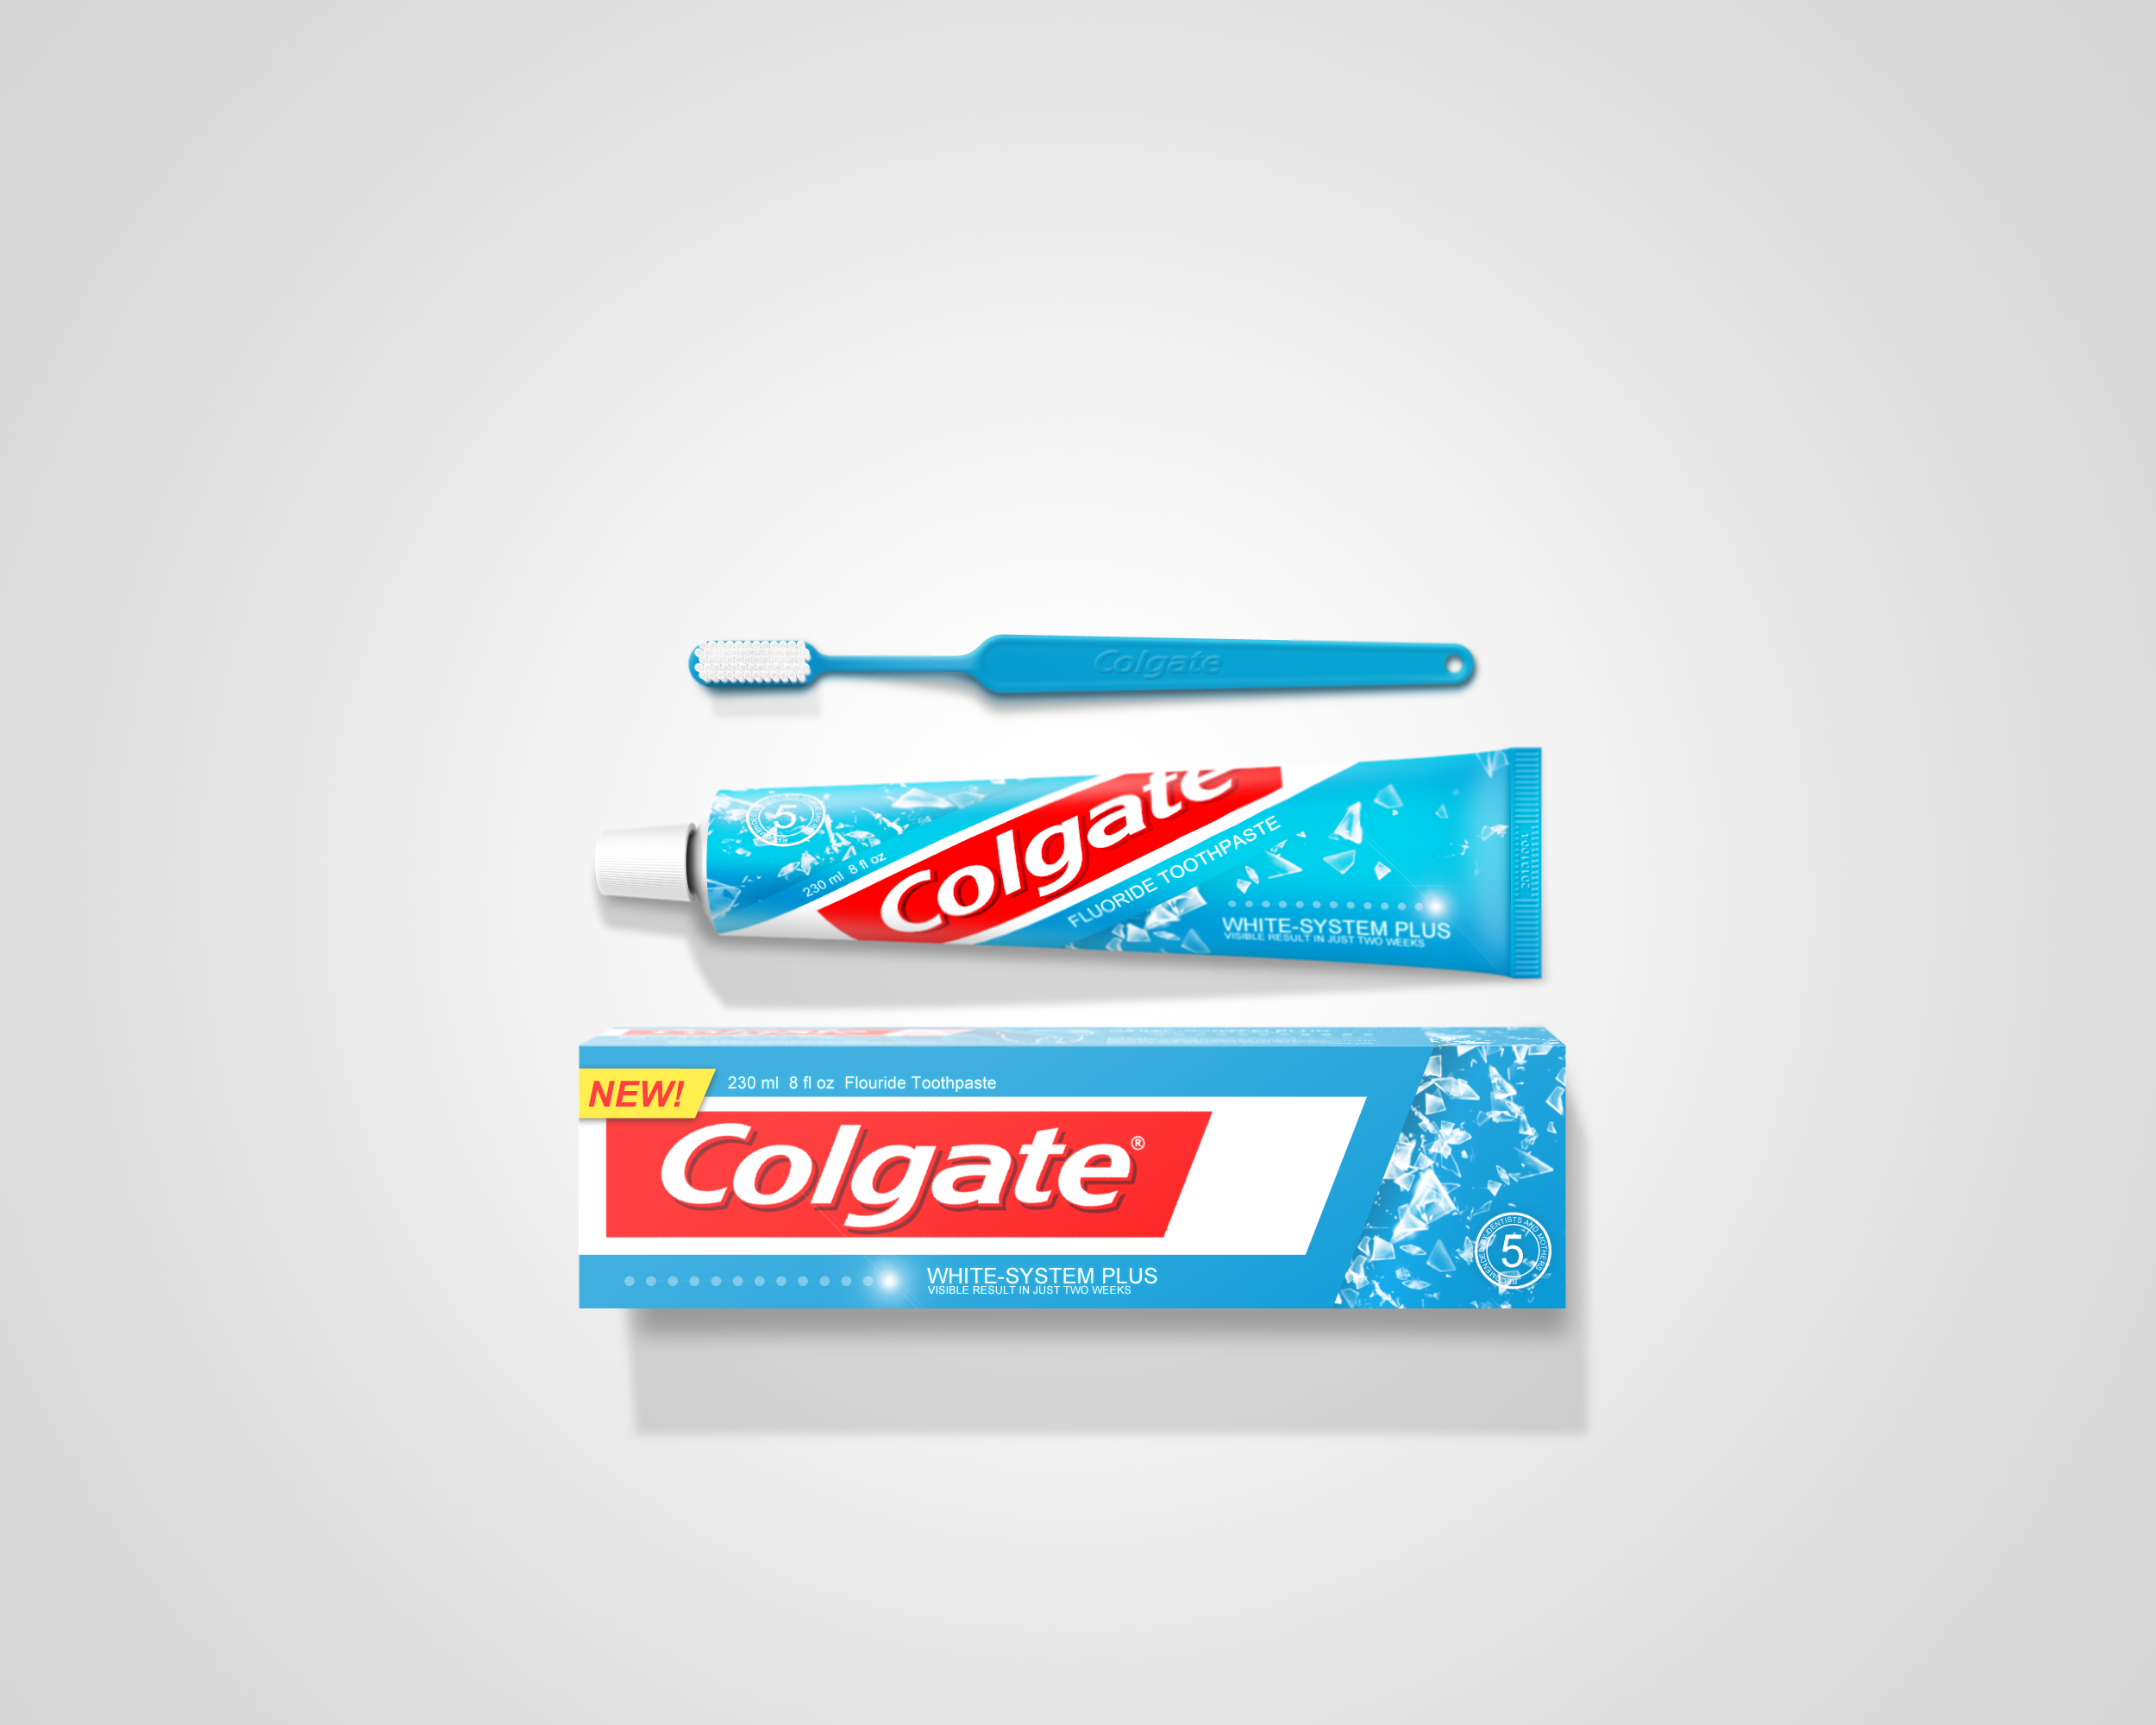 Toothpaste MockUp by Gorm Haraldsson on Dribbble